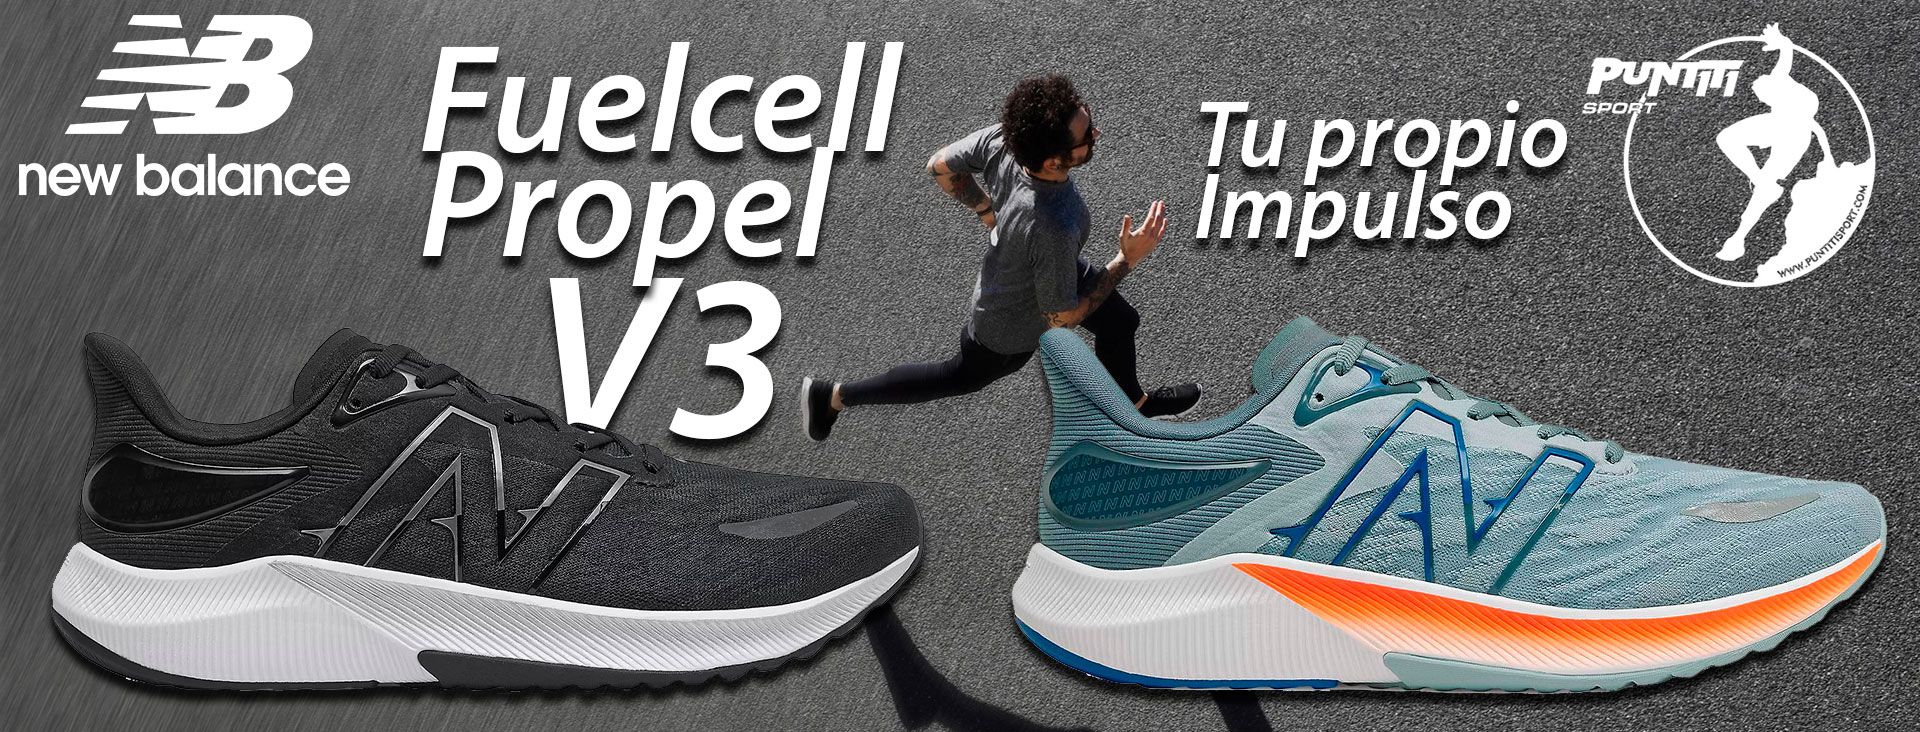 Promo-new-balance-fuelcell-propel-v3